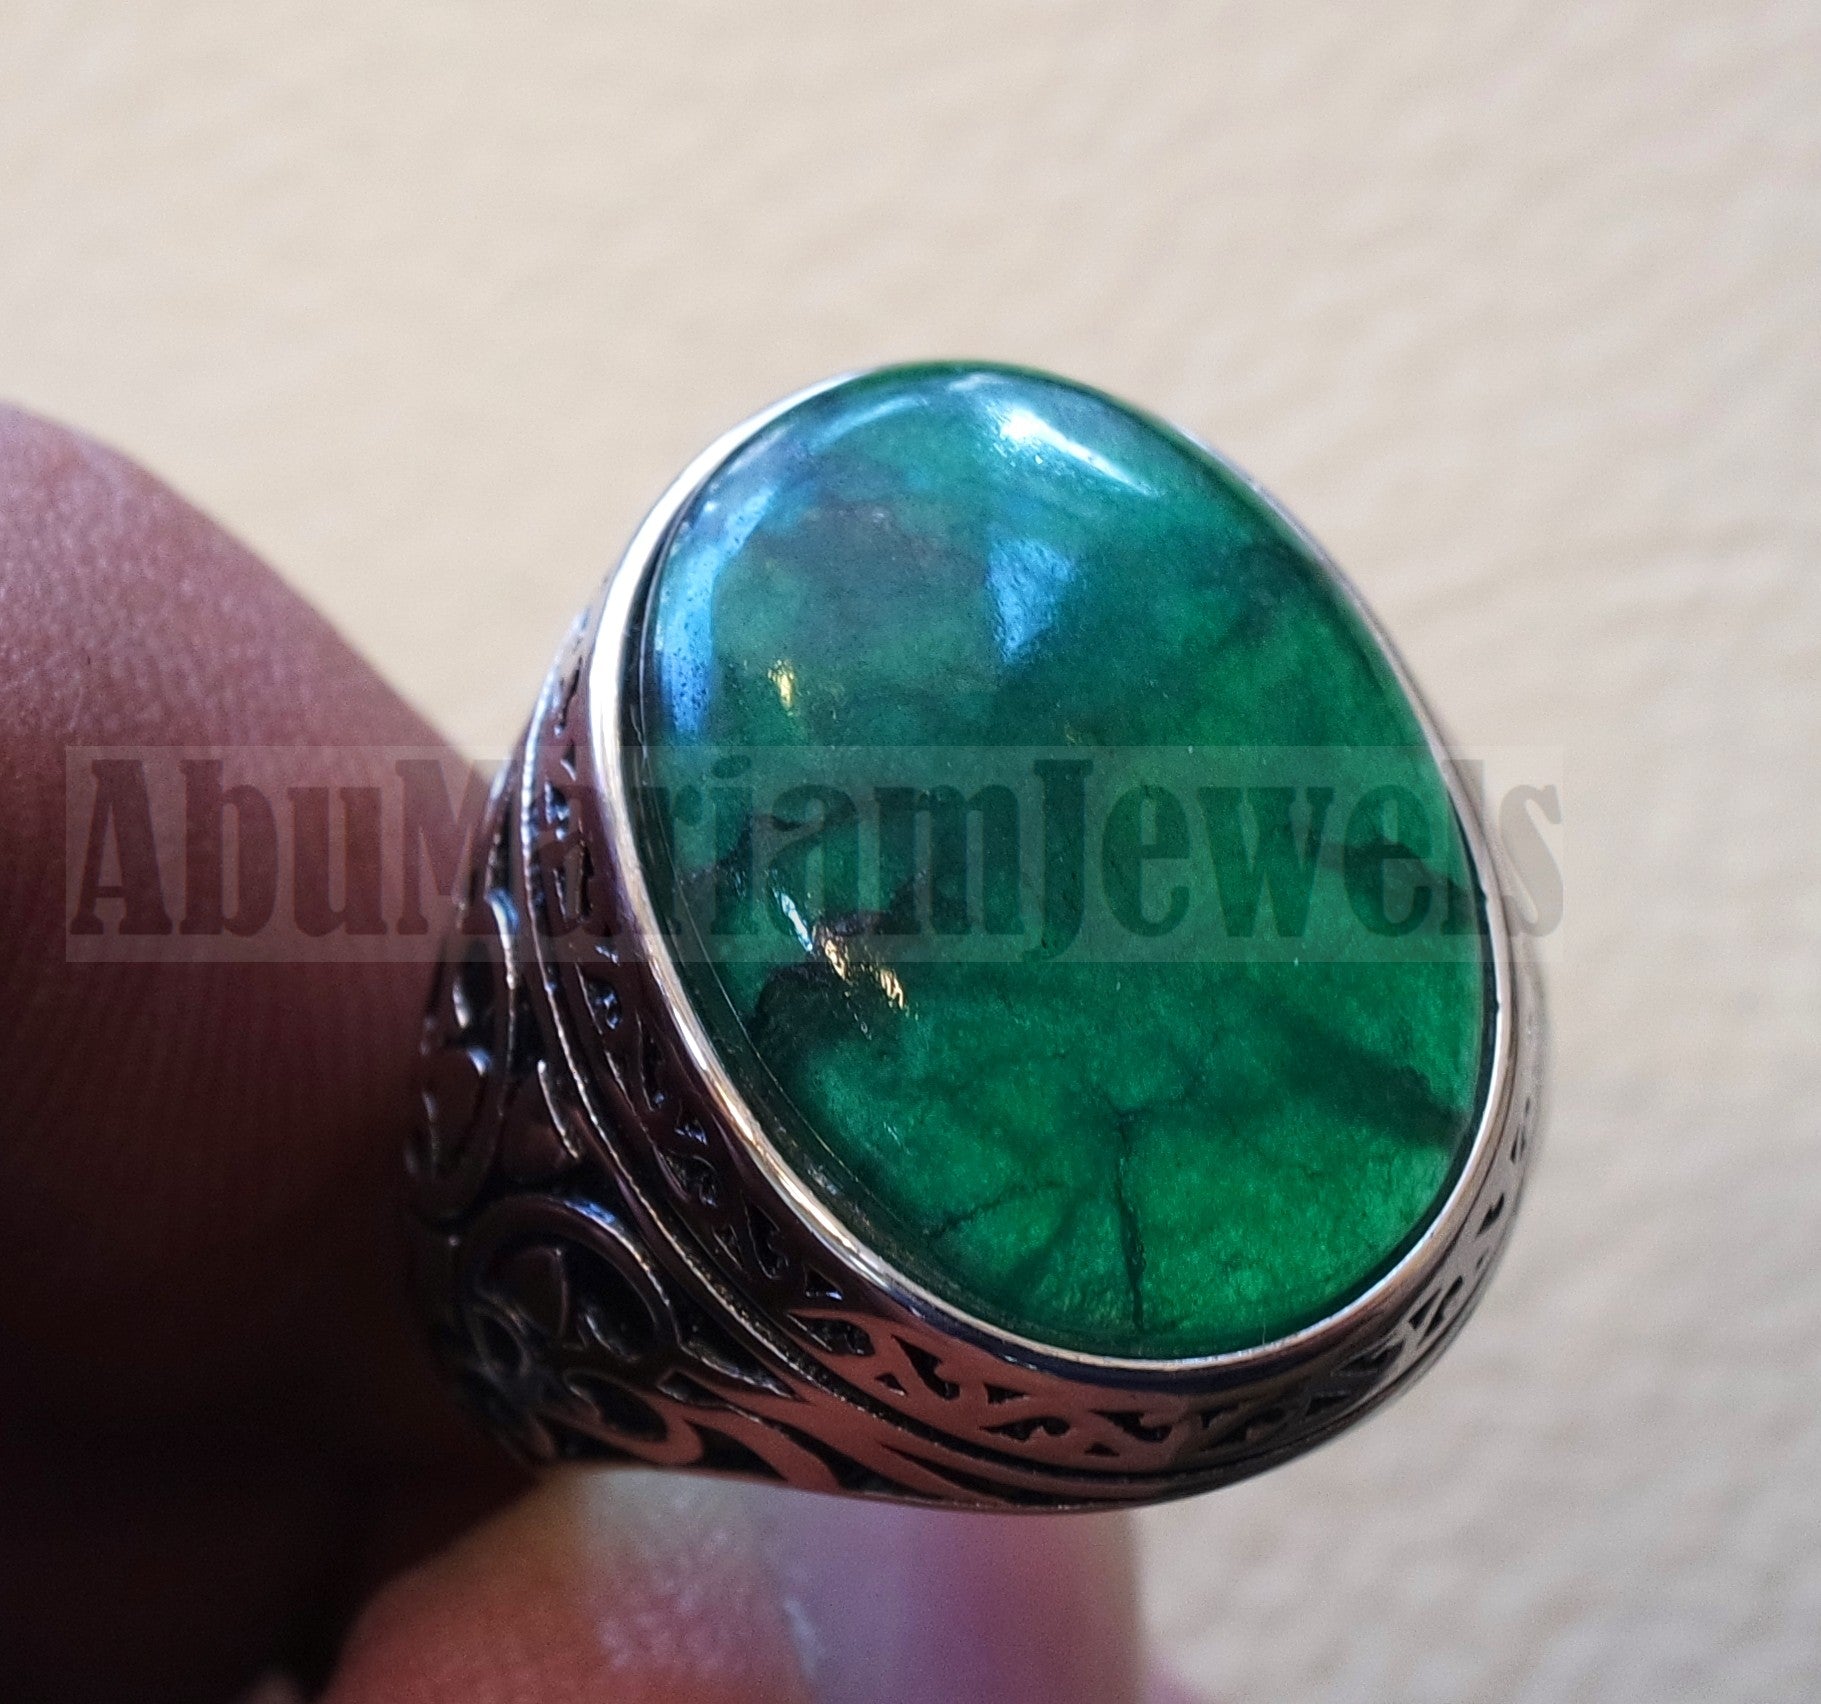 Treated natural corundum identical to genuine emerald stone color huge men ring sterling silver 925 any size ottoman jewelry زمرد